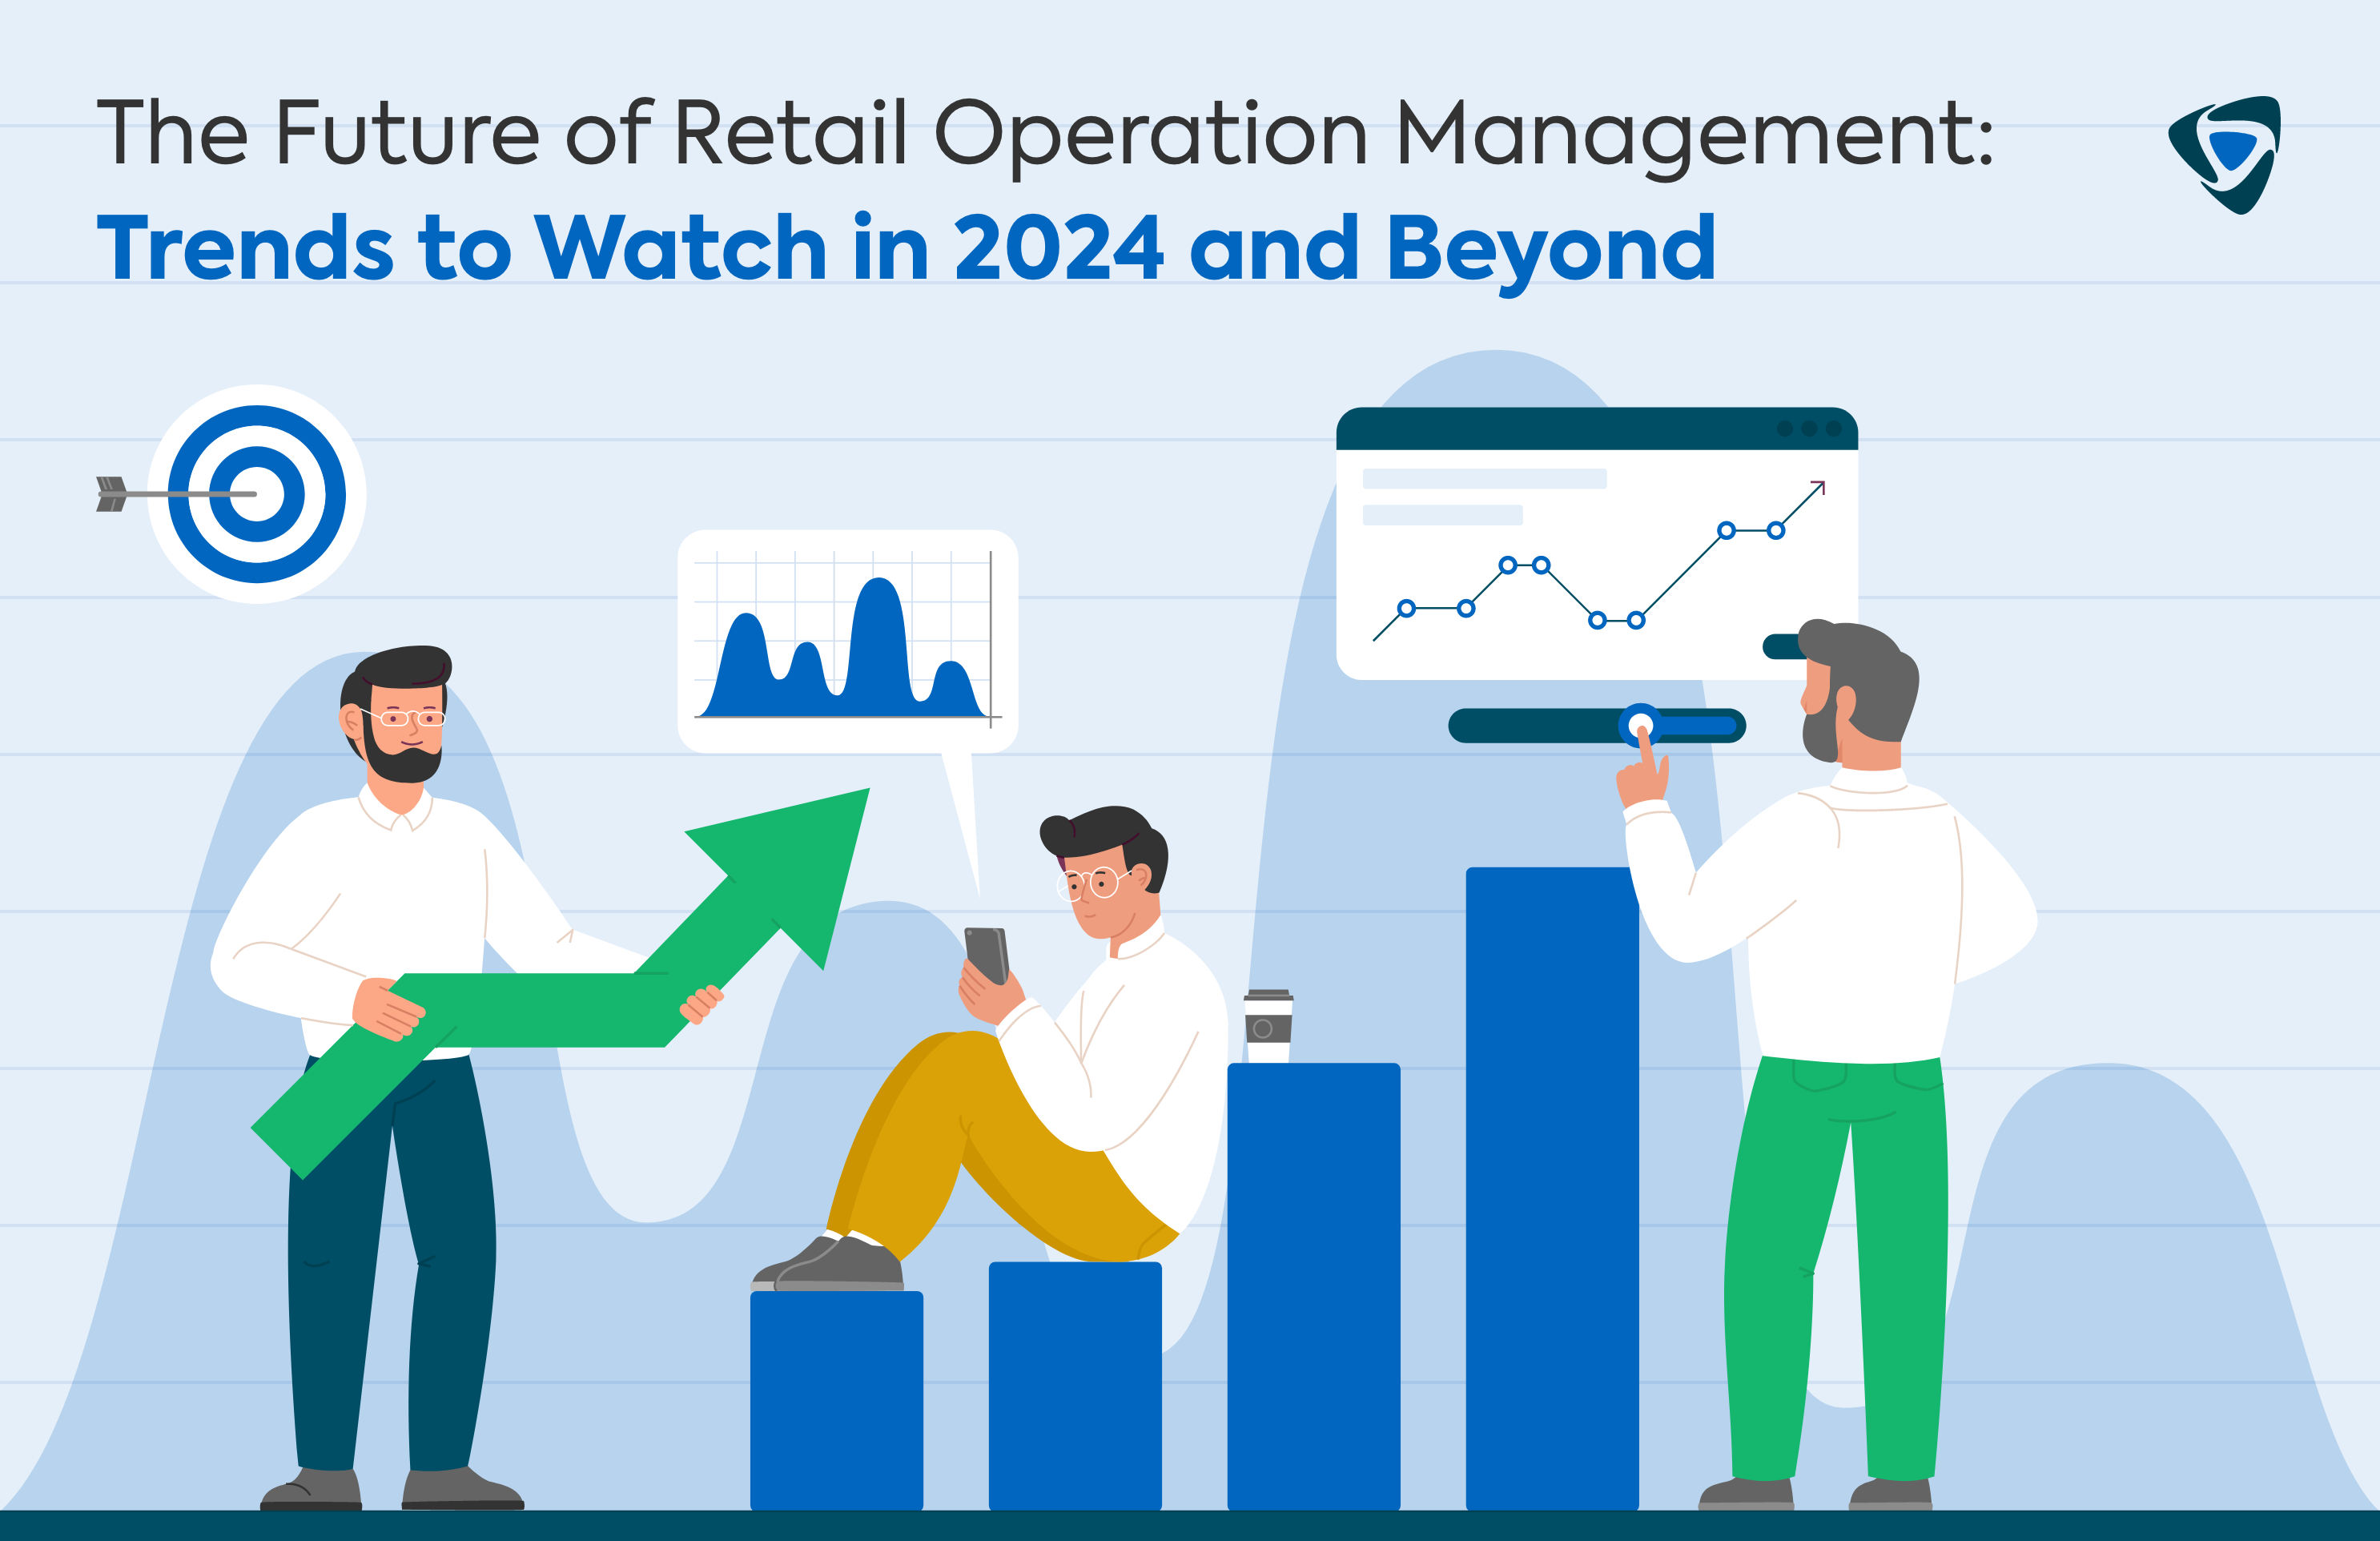 The Future of Retail Operation Management: Trends to Watch in 2024 and Beyond